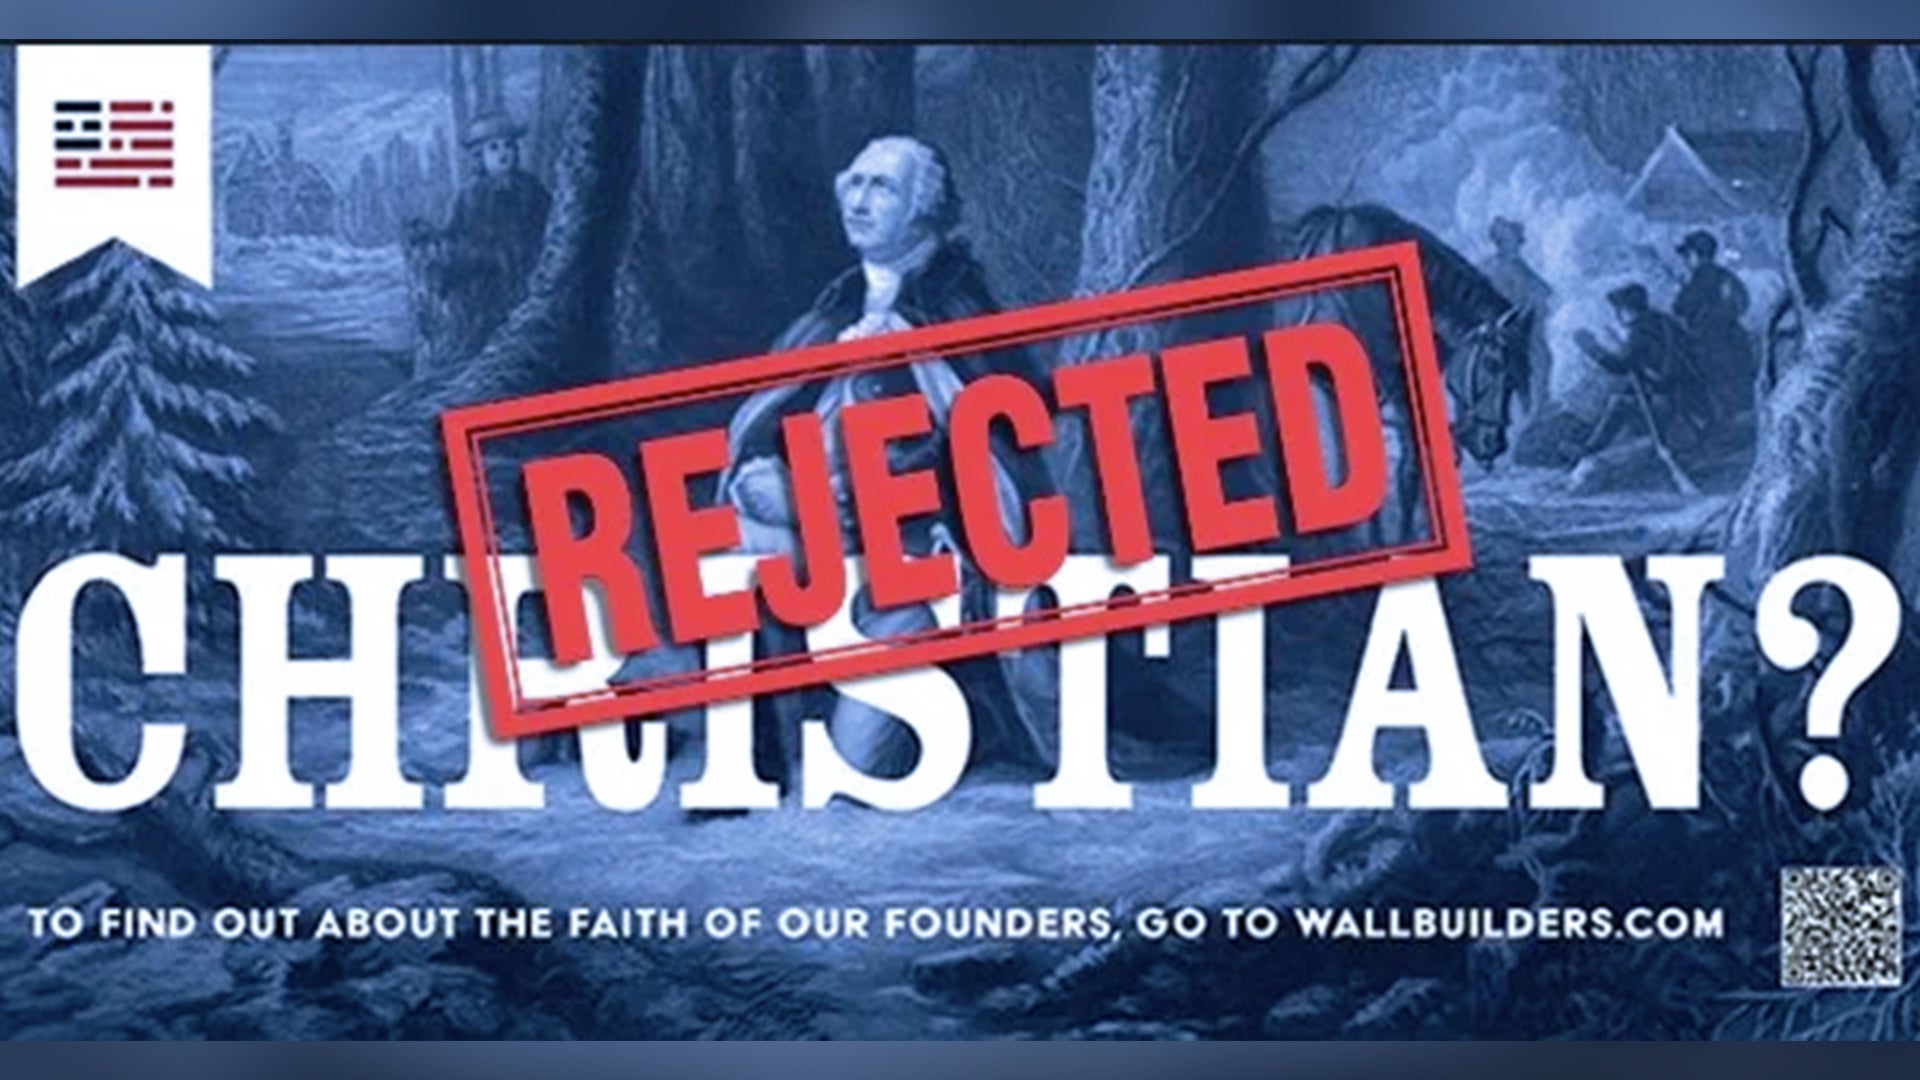 'Targeted': WallBuilders Sues After Christian Bus Ad Featuring George Washington Is Rejected | CBN News